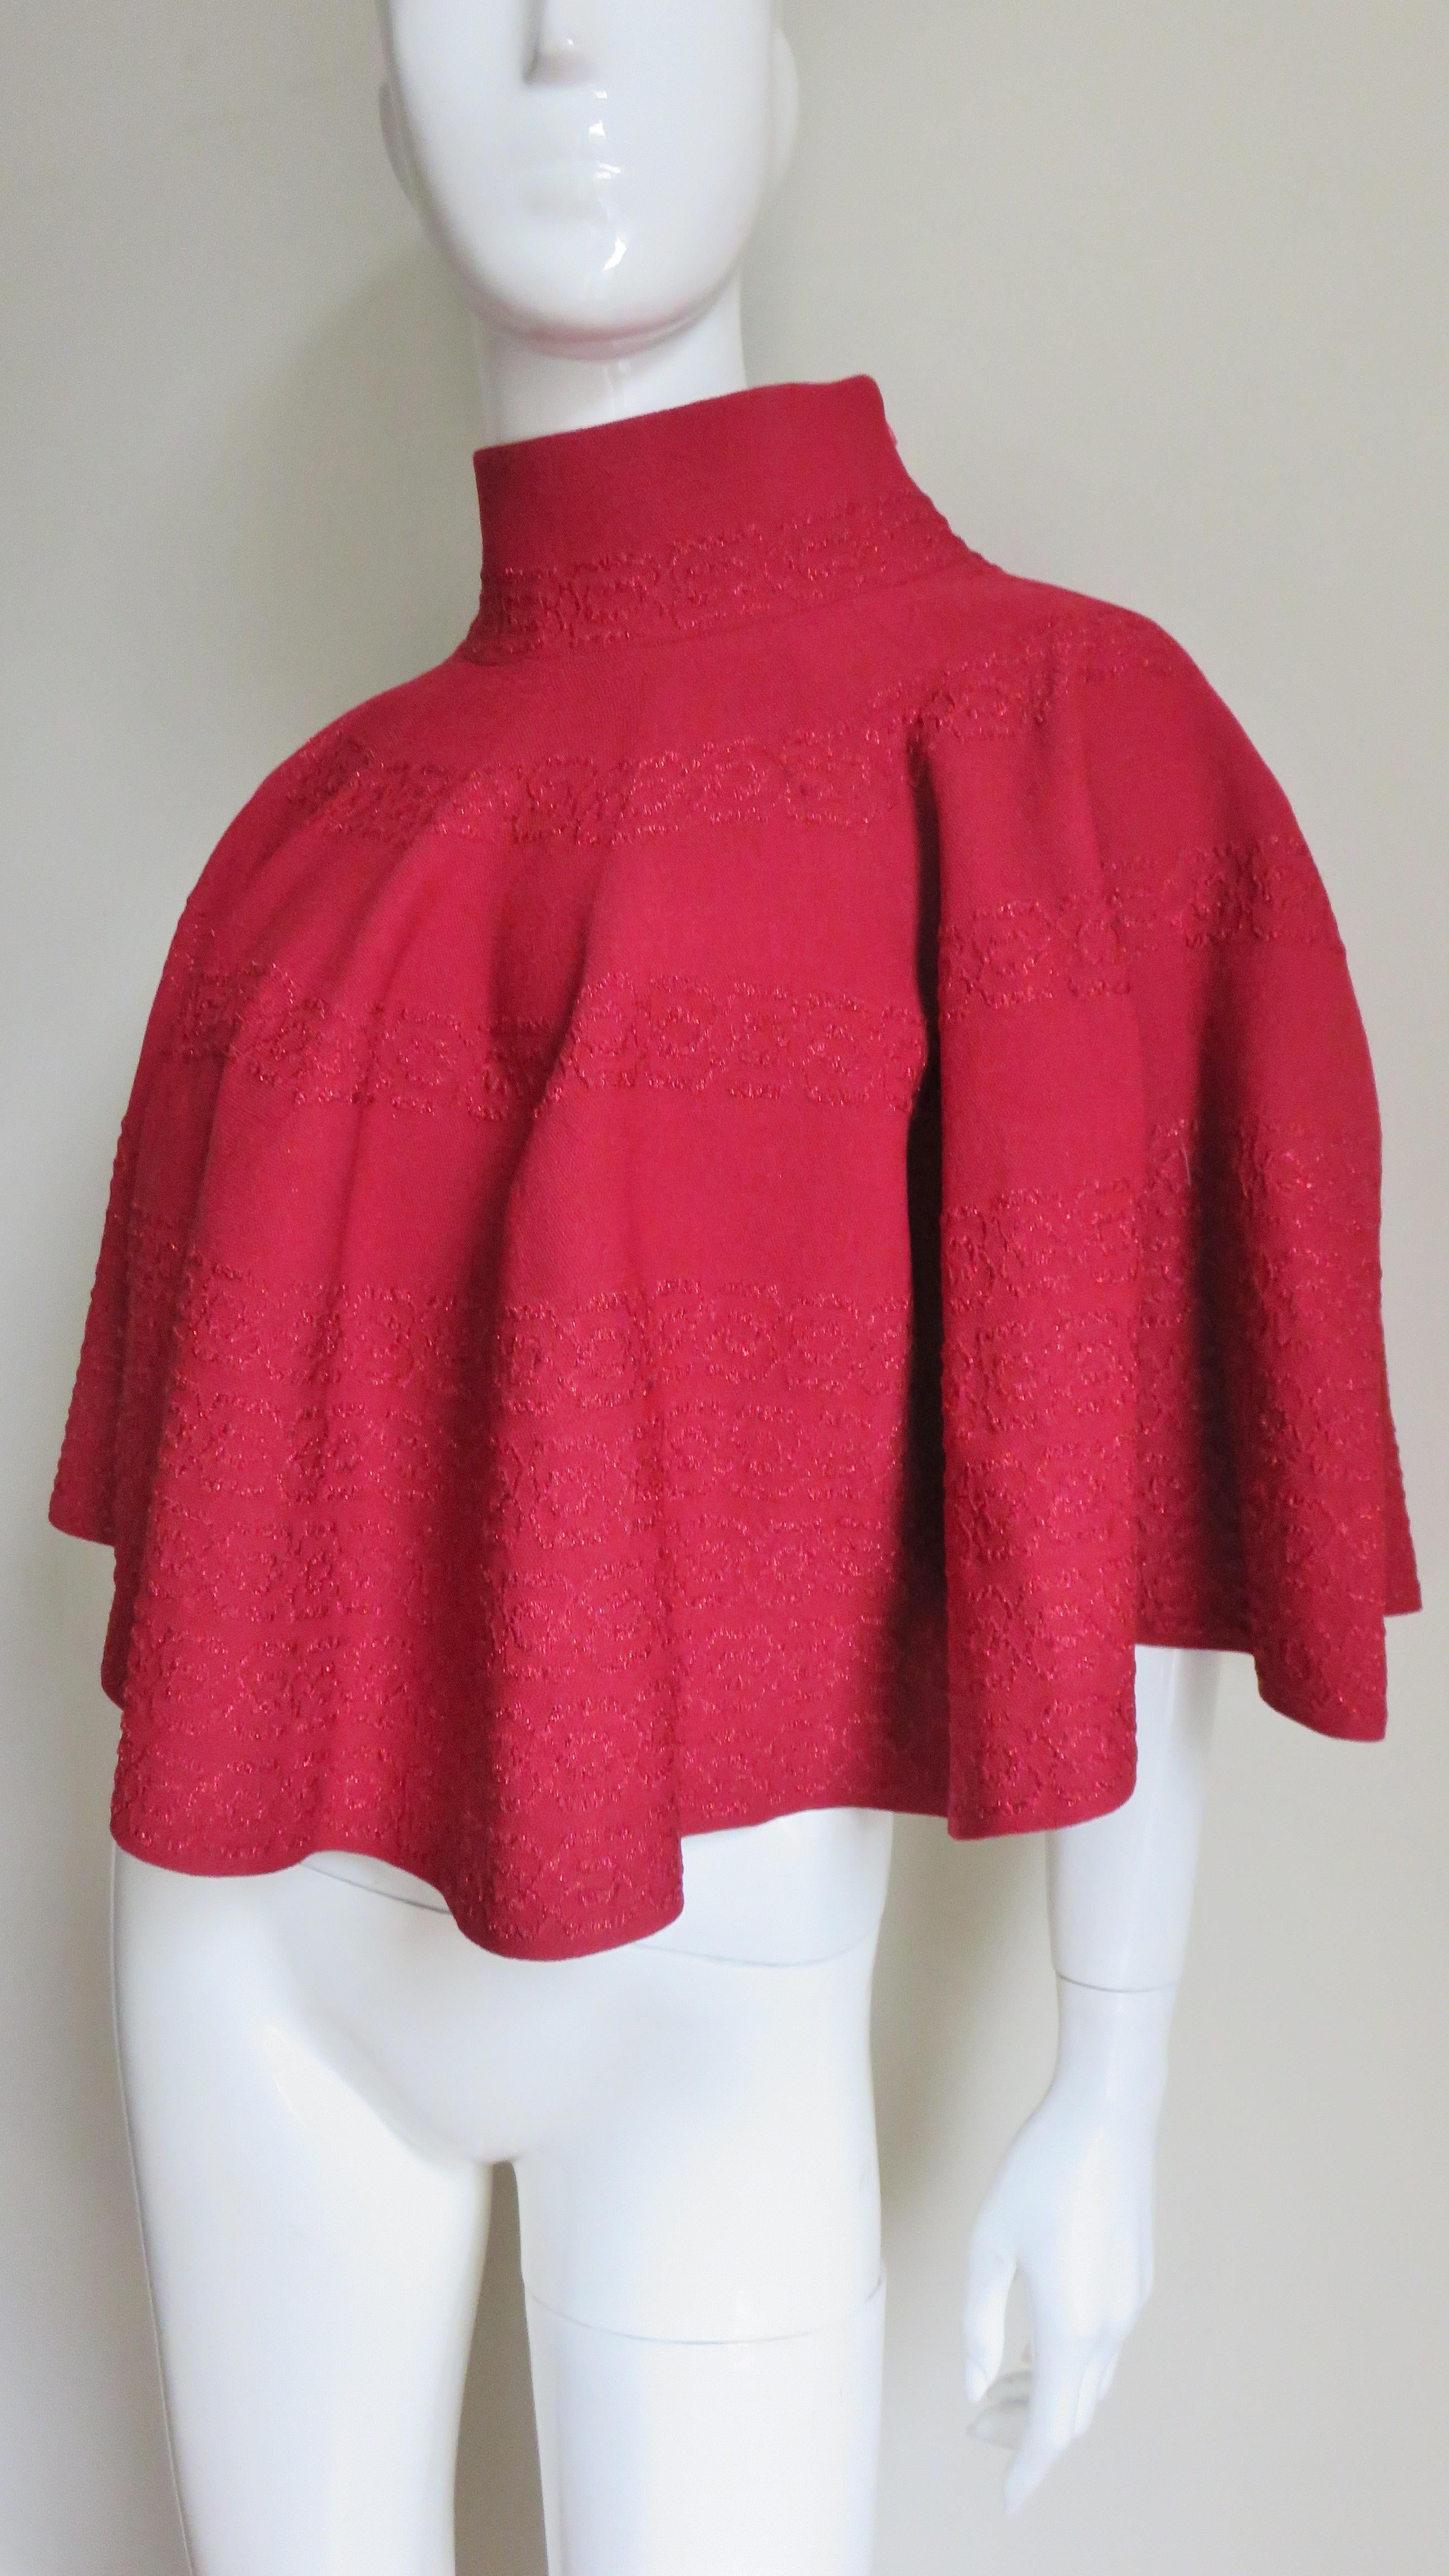 A fabulous red knit cape poncho by Azzedine Alaia.  It is elbow length with a stand up collar and a subtle abstract horizontal pattern in rows around the cape.  There is a zipper at the side of the neck and shoulder and it is unlined.
One Size Fits